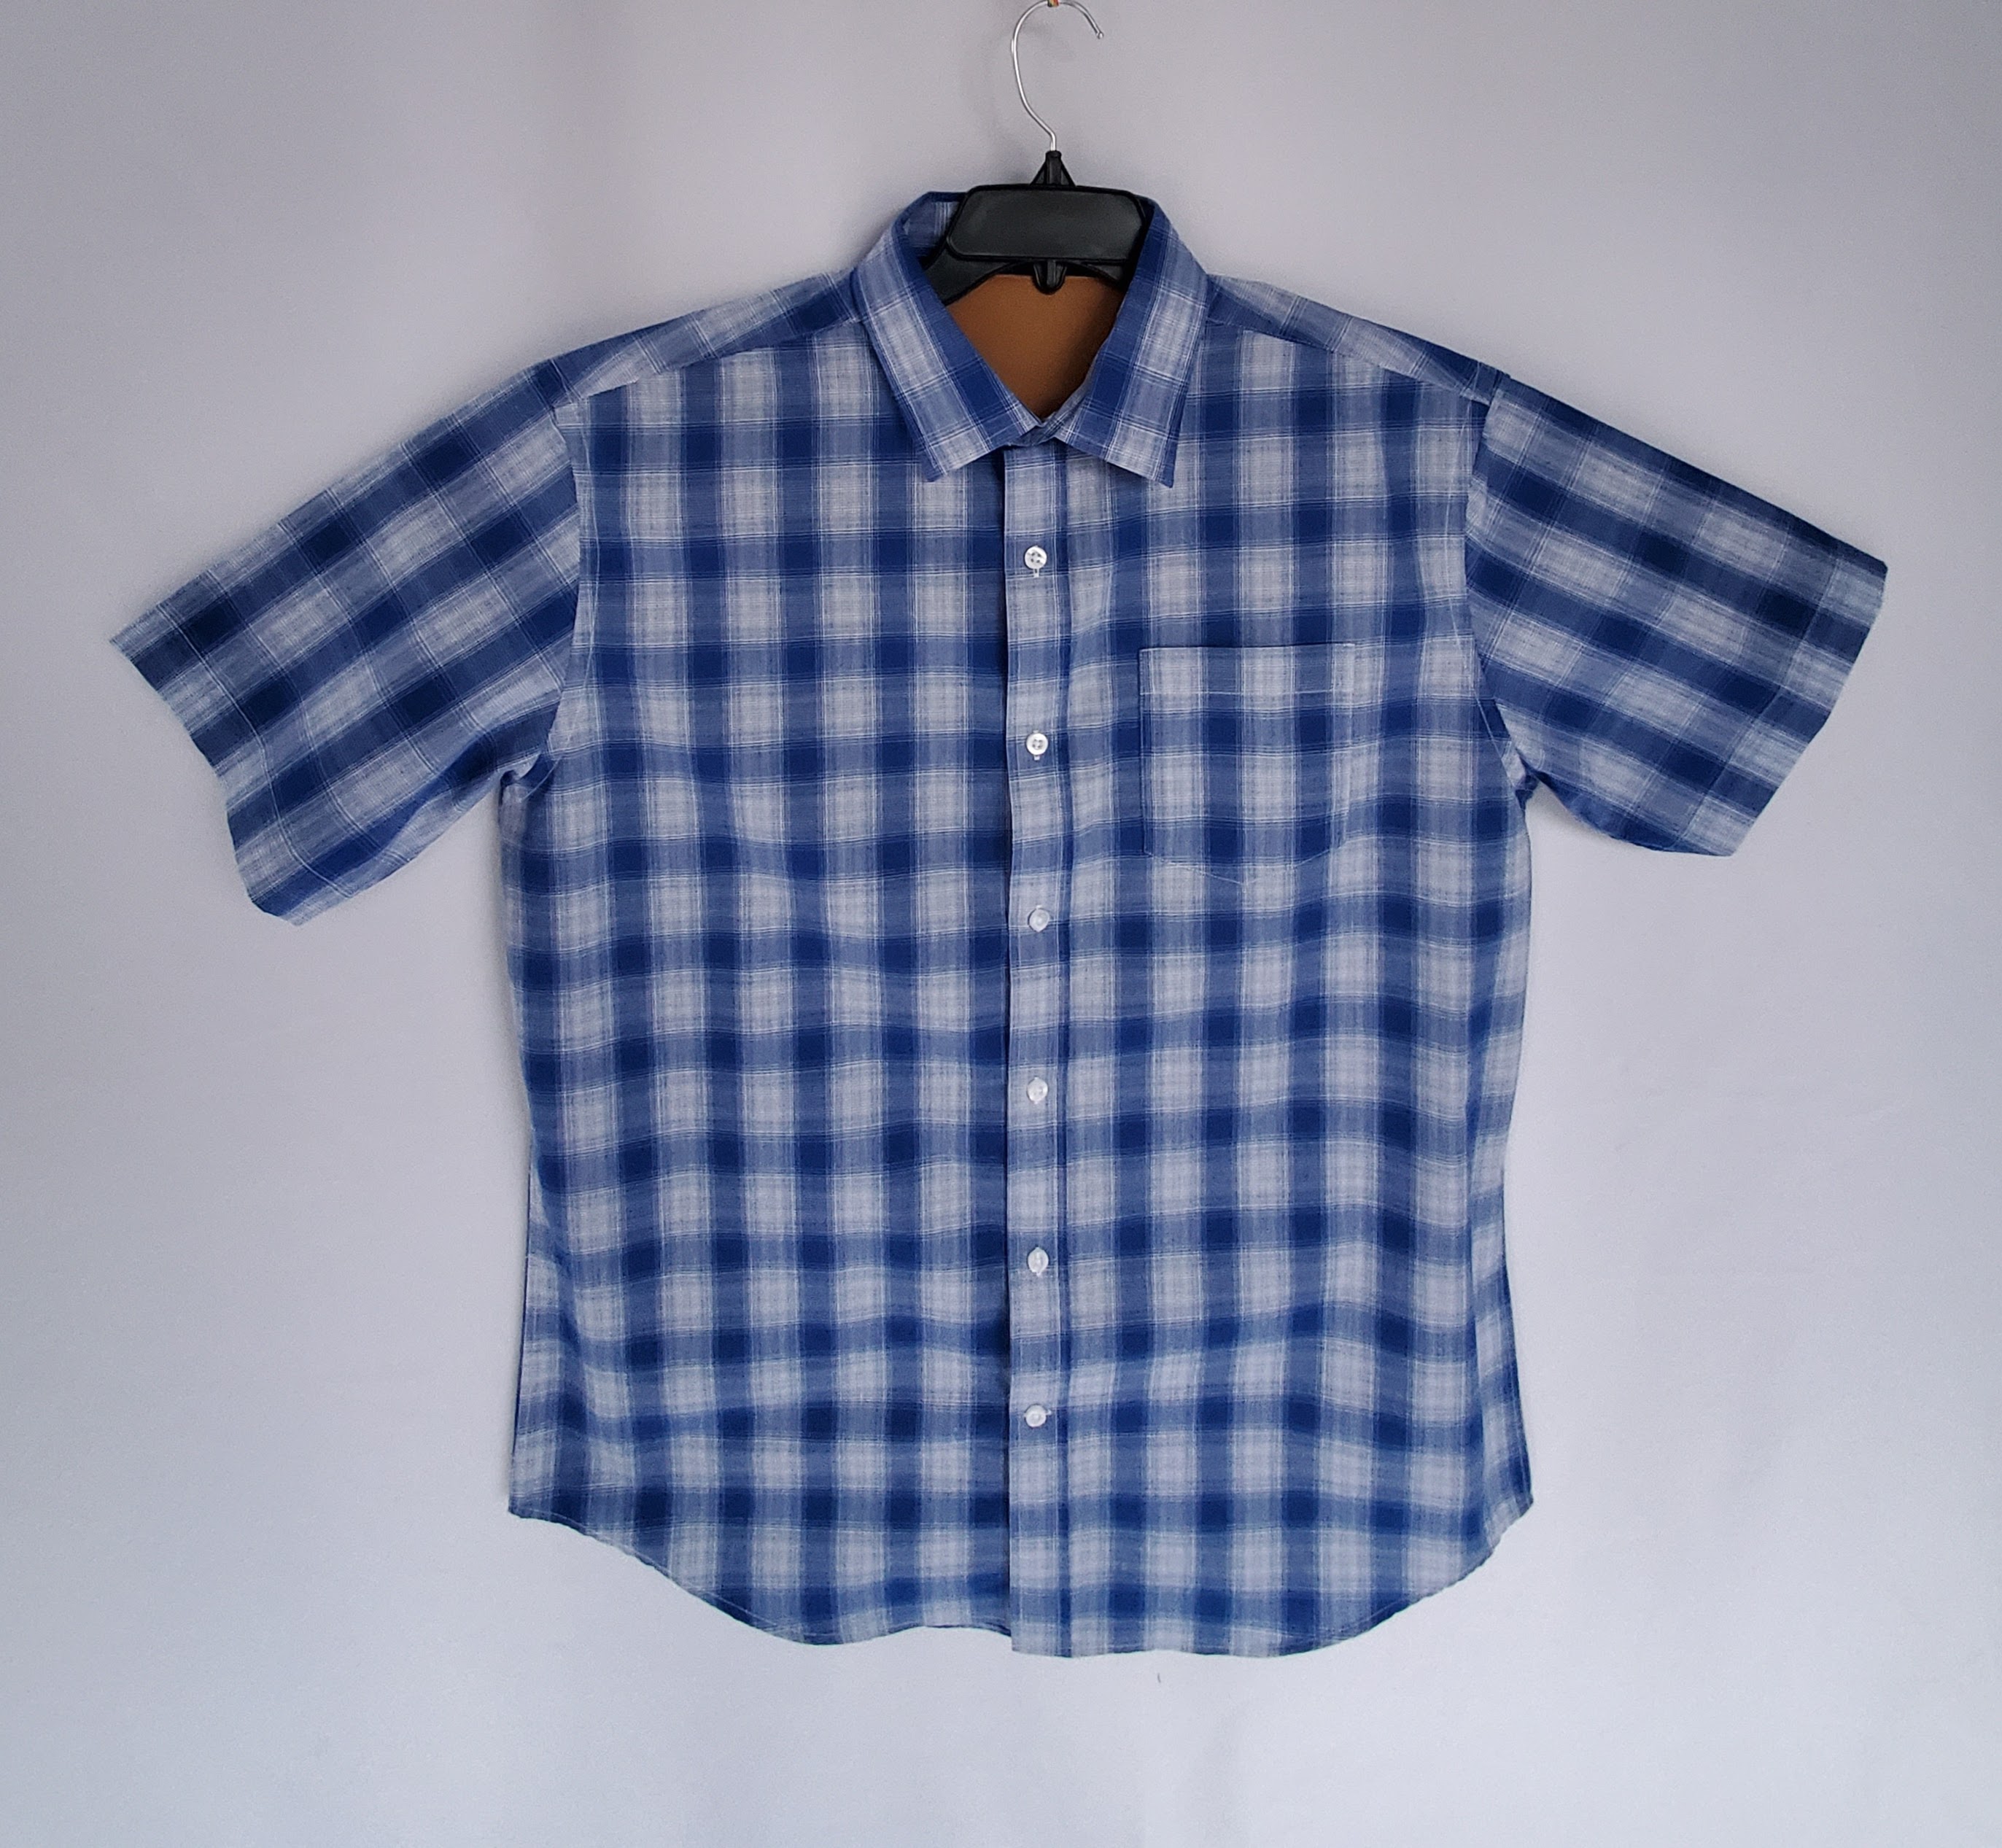 Boy's Short Sleeve Blue and White Plaid Casual Shirt - Akashi Collection